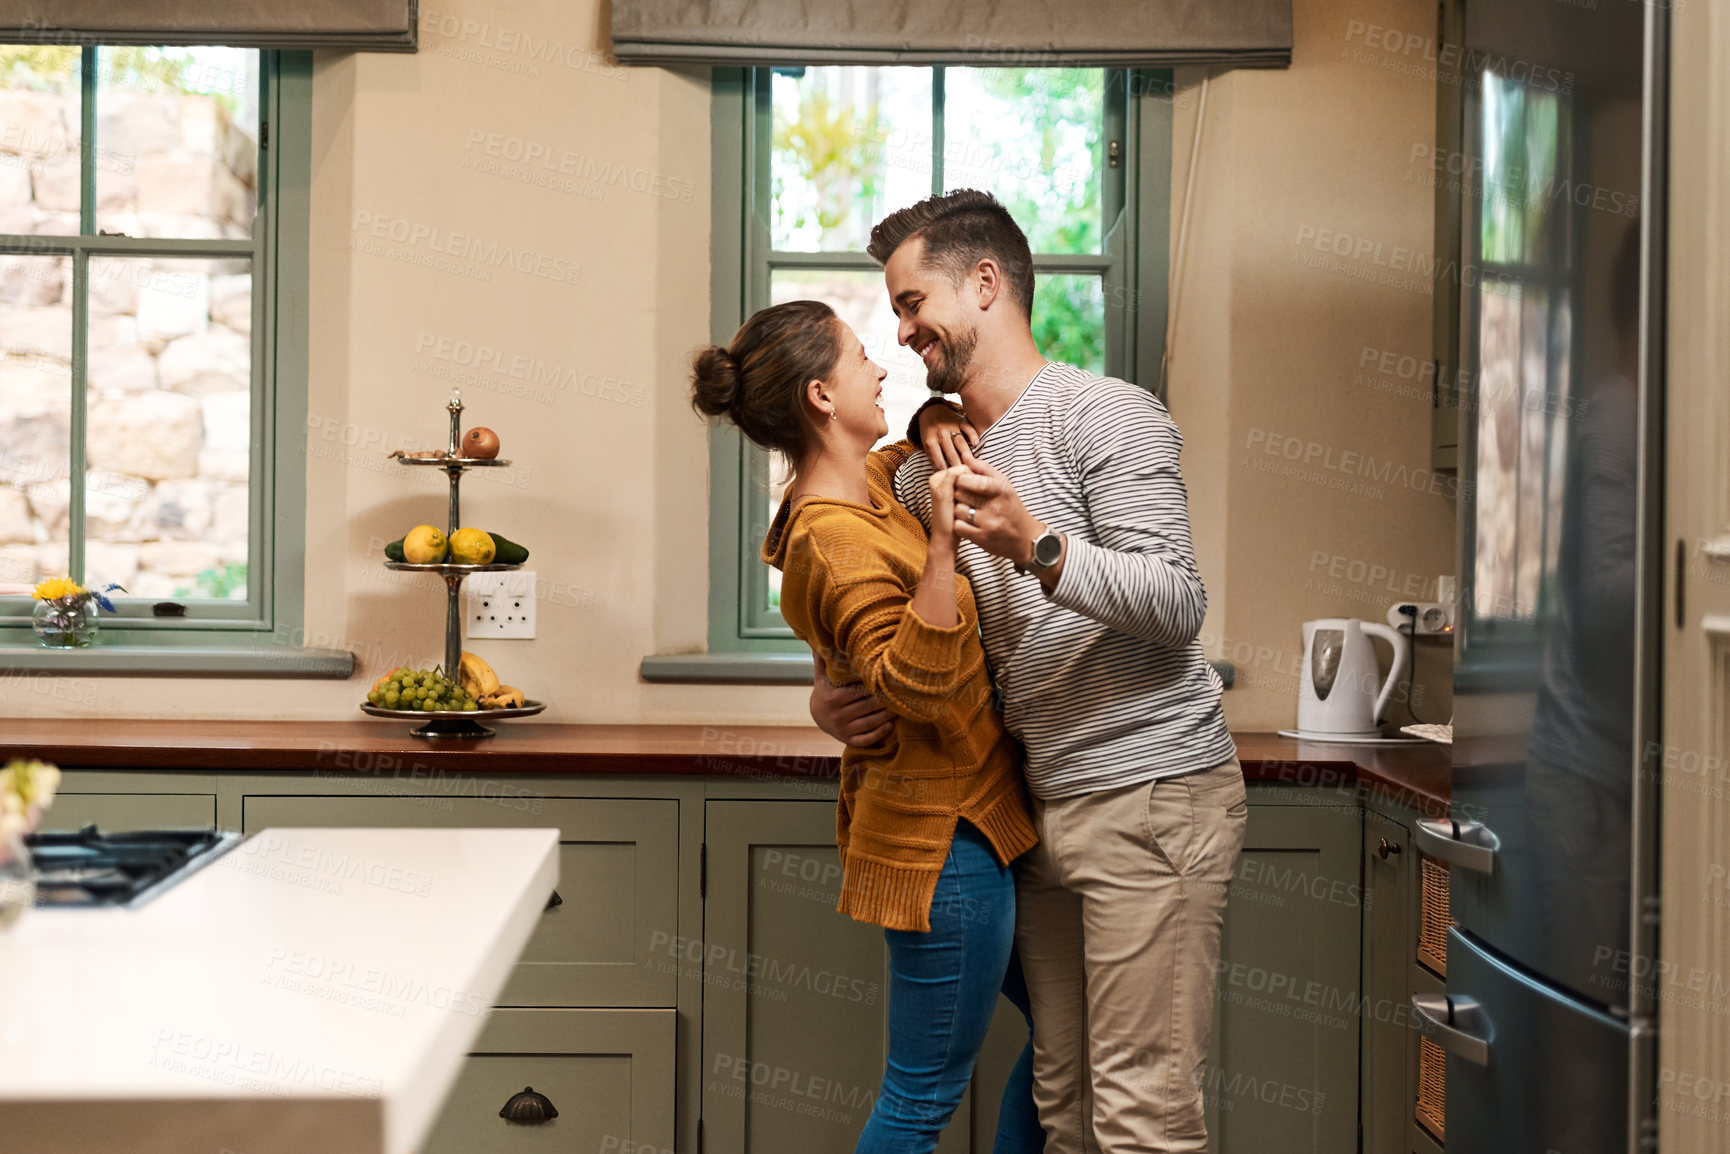 Buy stock photo Cropped shot of an affectionate young couple dancing together in their kitchen at home